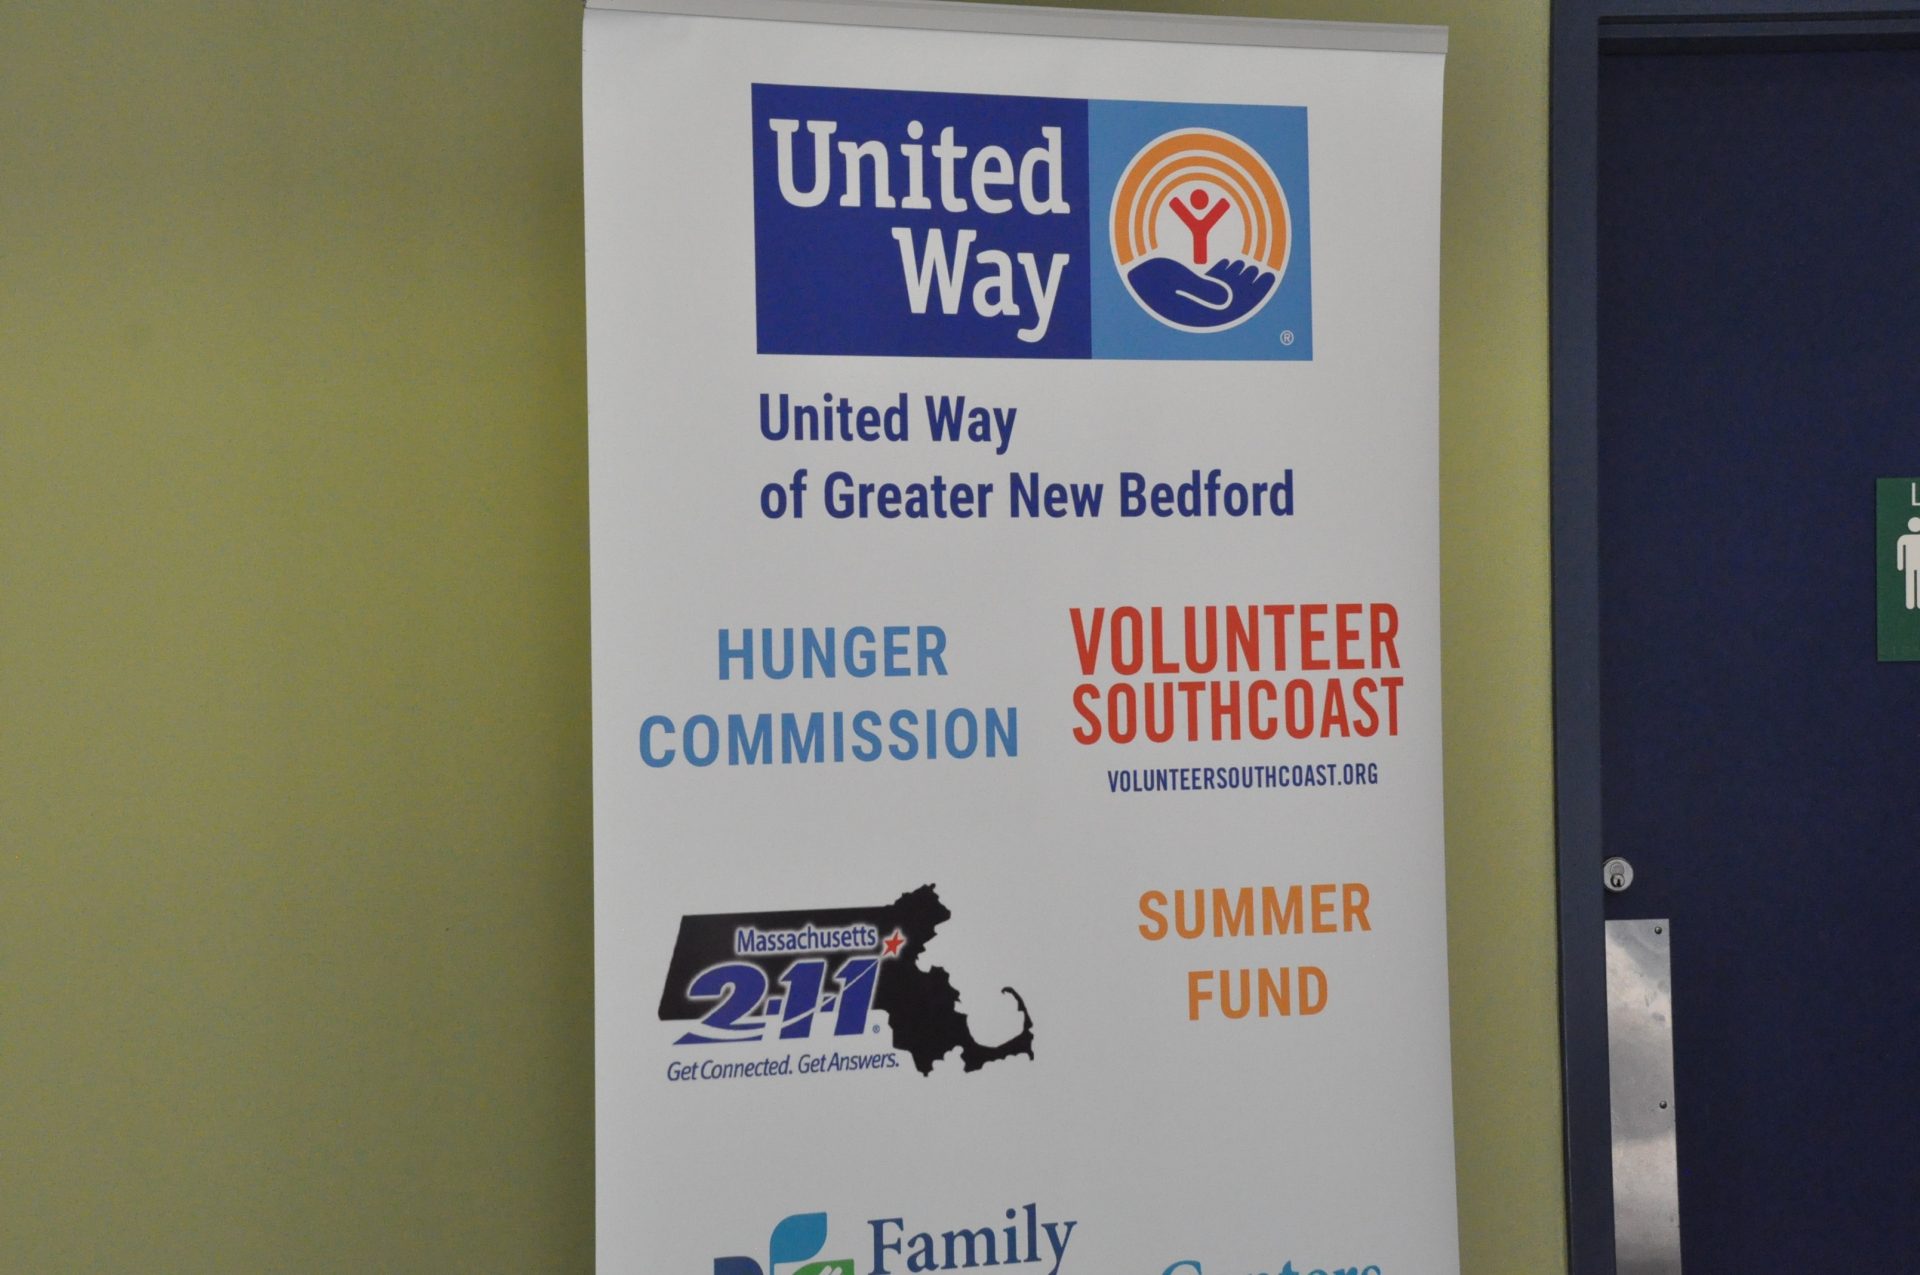 United way of Greater New Bedford